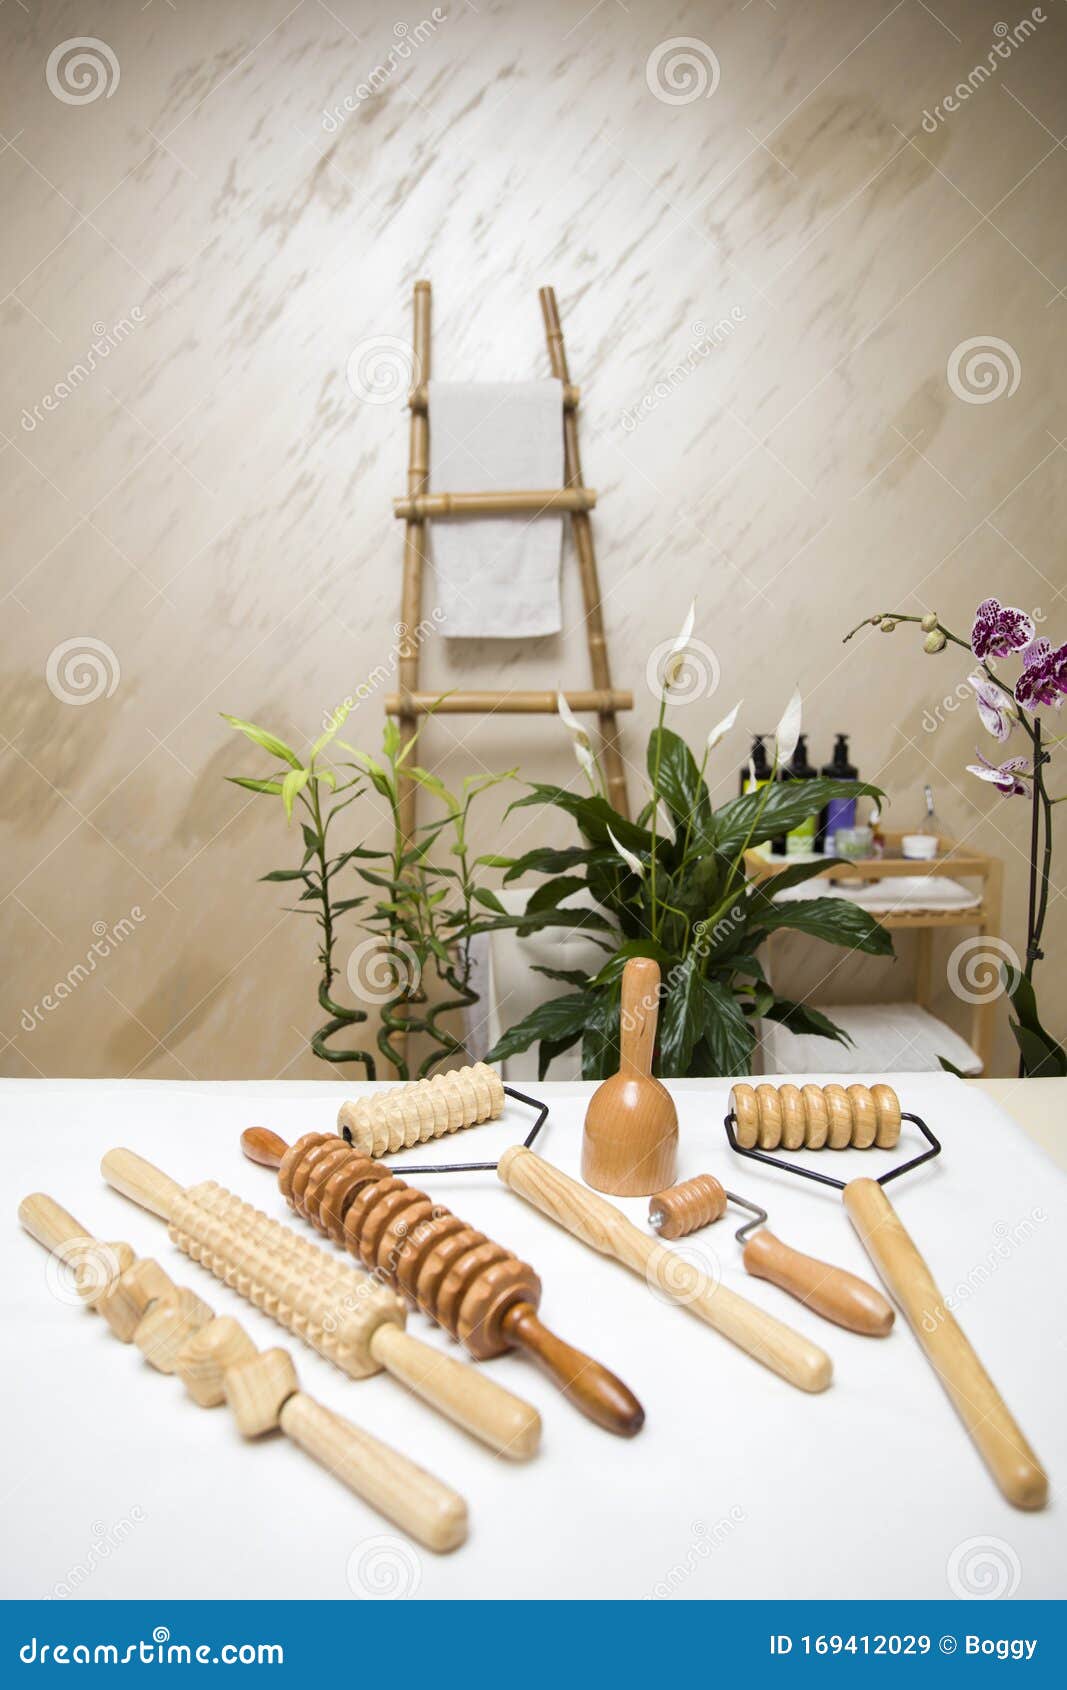 wooden equipment for anti-cellulite maderotherapy massage